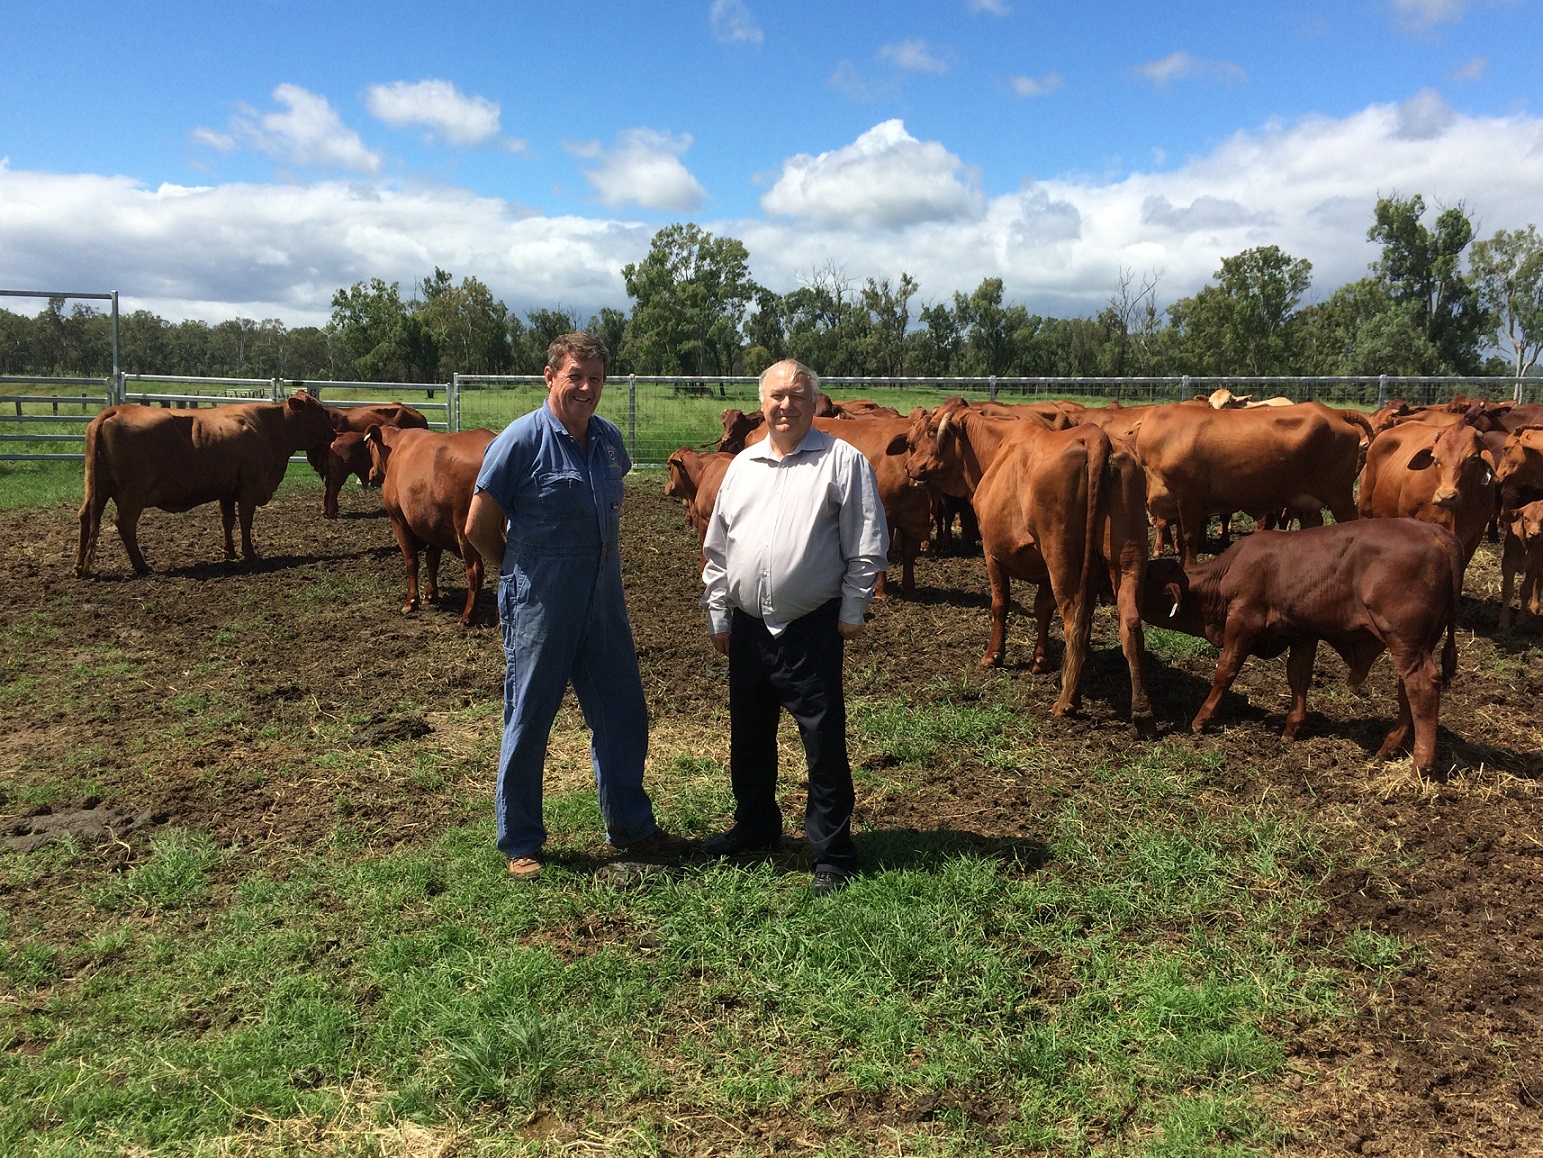 ol of Veterinary Science hoProfessor Michael Holland and Professor Michael McGowan with cattle